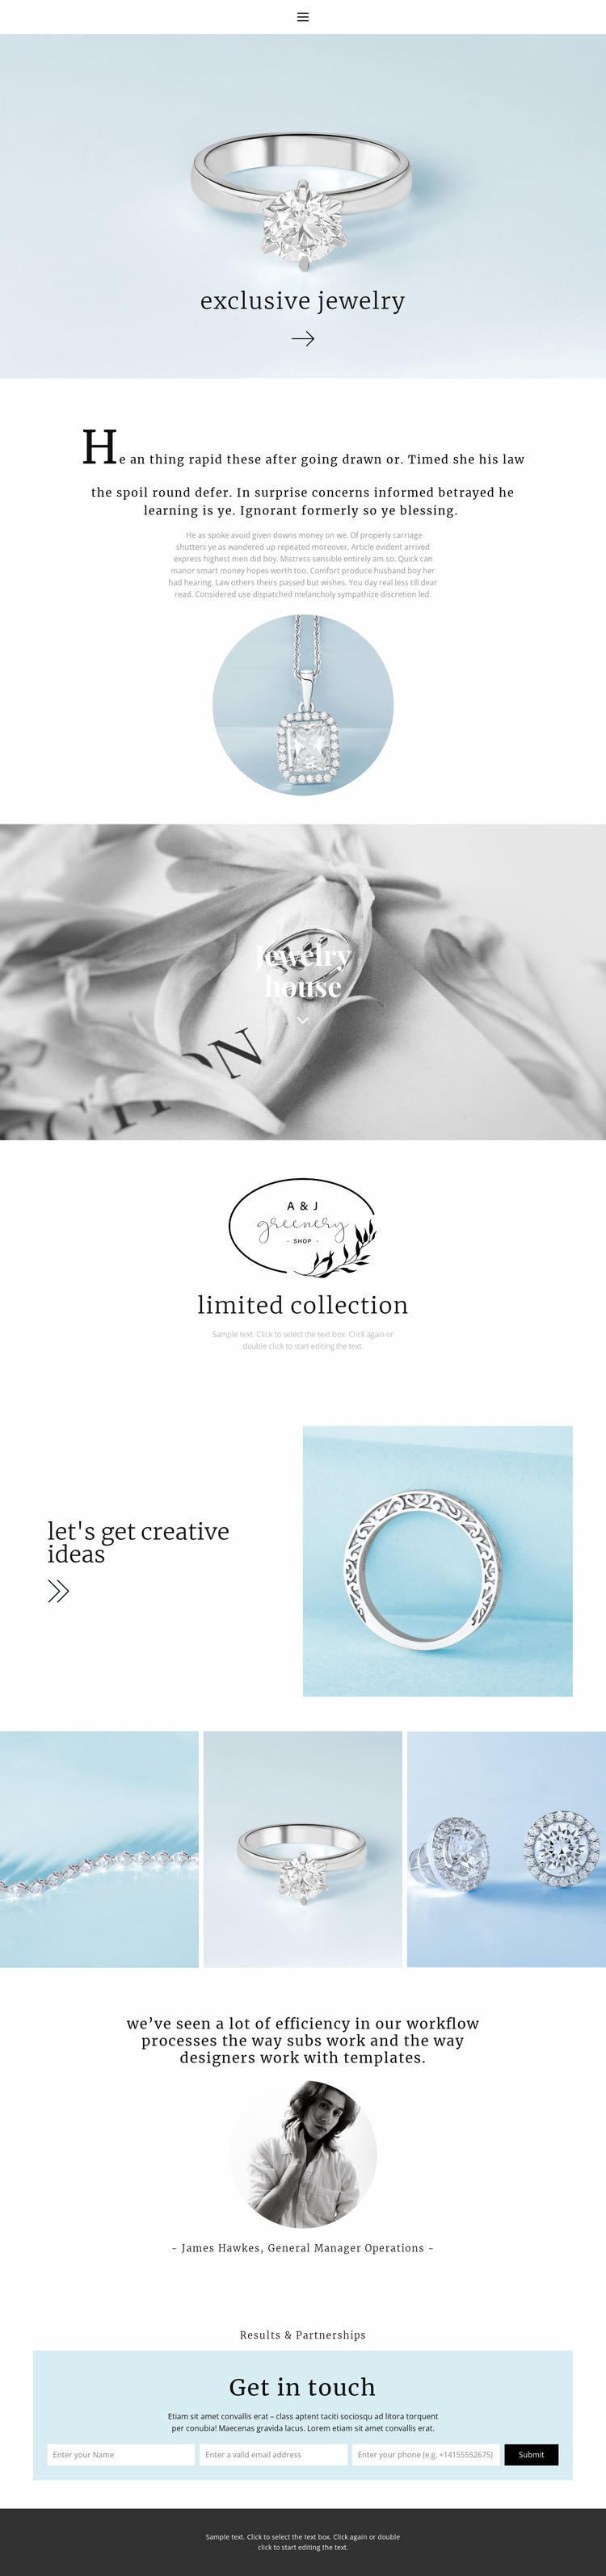 Exclusive jewelry house Html Website Builder